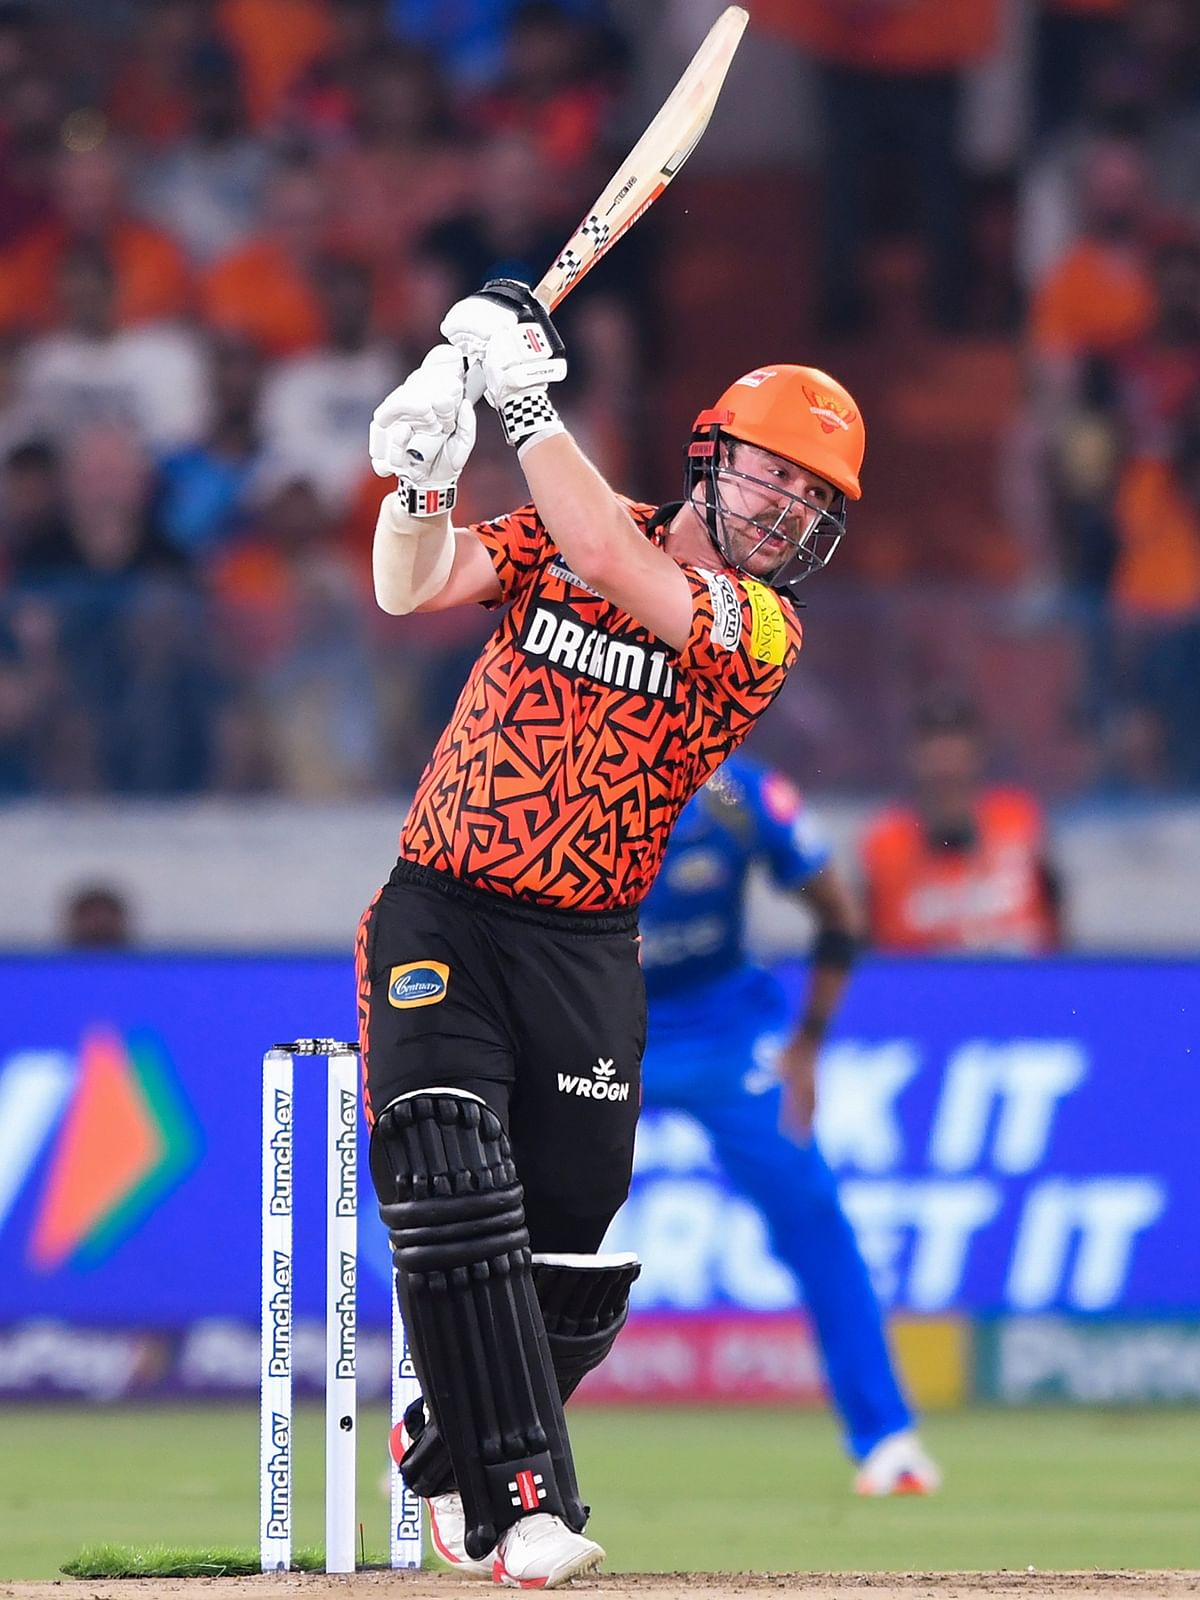 Australia's Travis Head gave SRH an explosive start and scored 62 runs in 24 balls. In his debut for SRH, he smashed nine boundaries and three sixes.